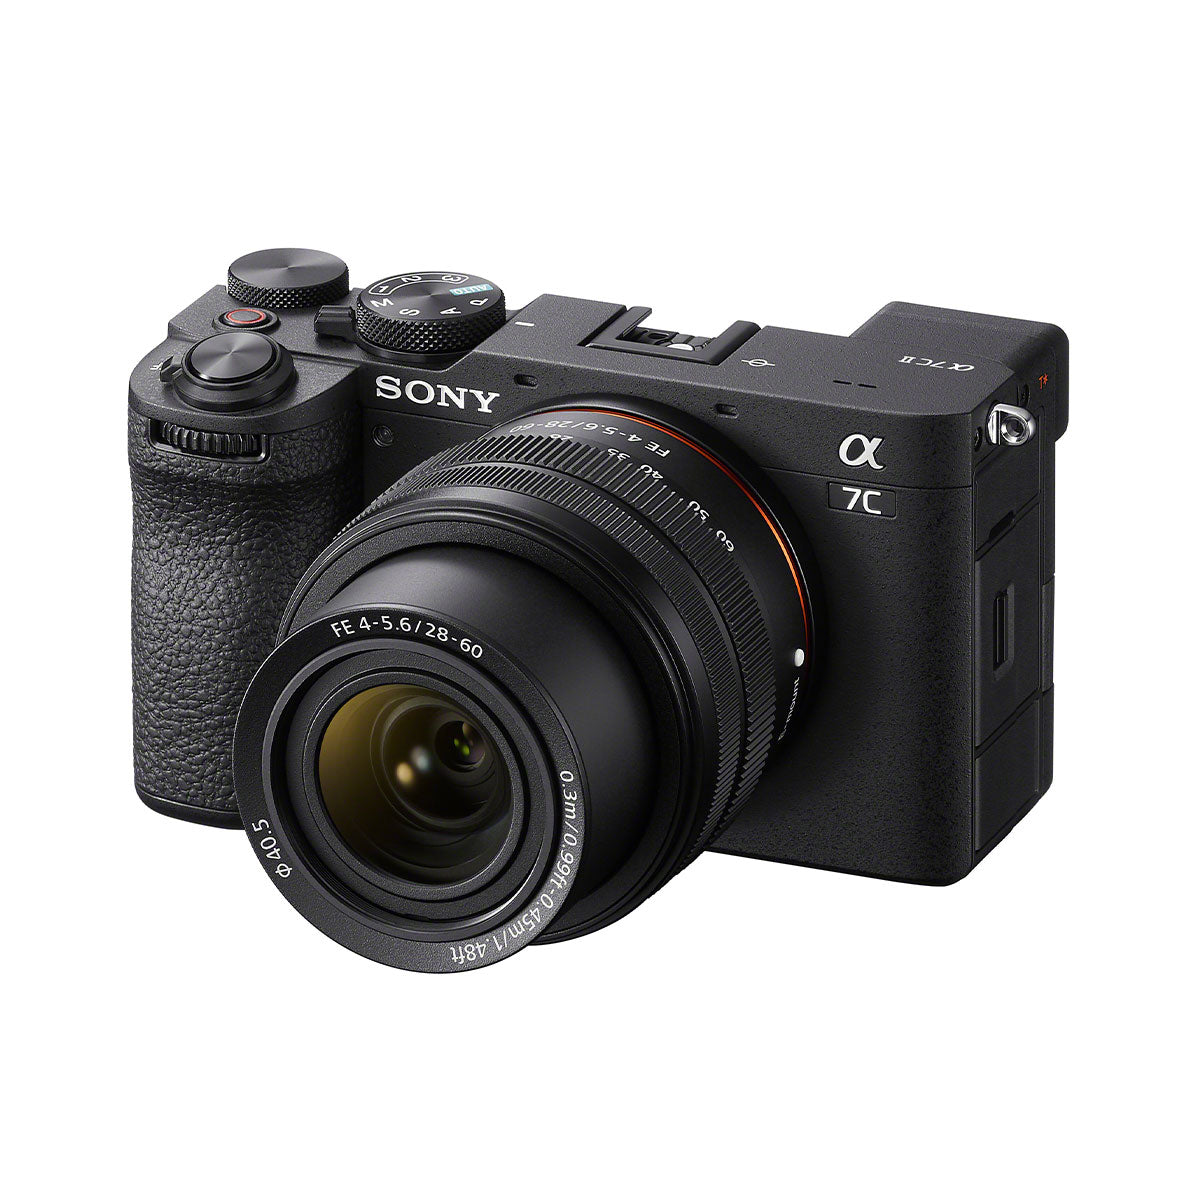 Sony a7C II Mirrorless Camera with FE 28-60mm f/4-5.6 Lens (Black)